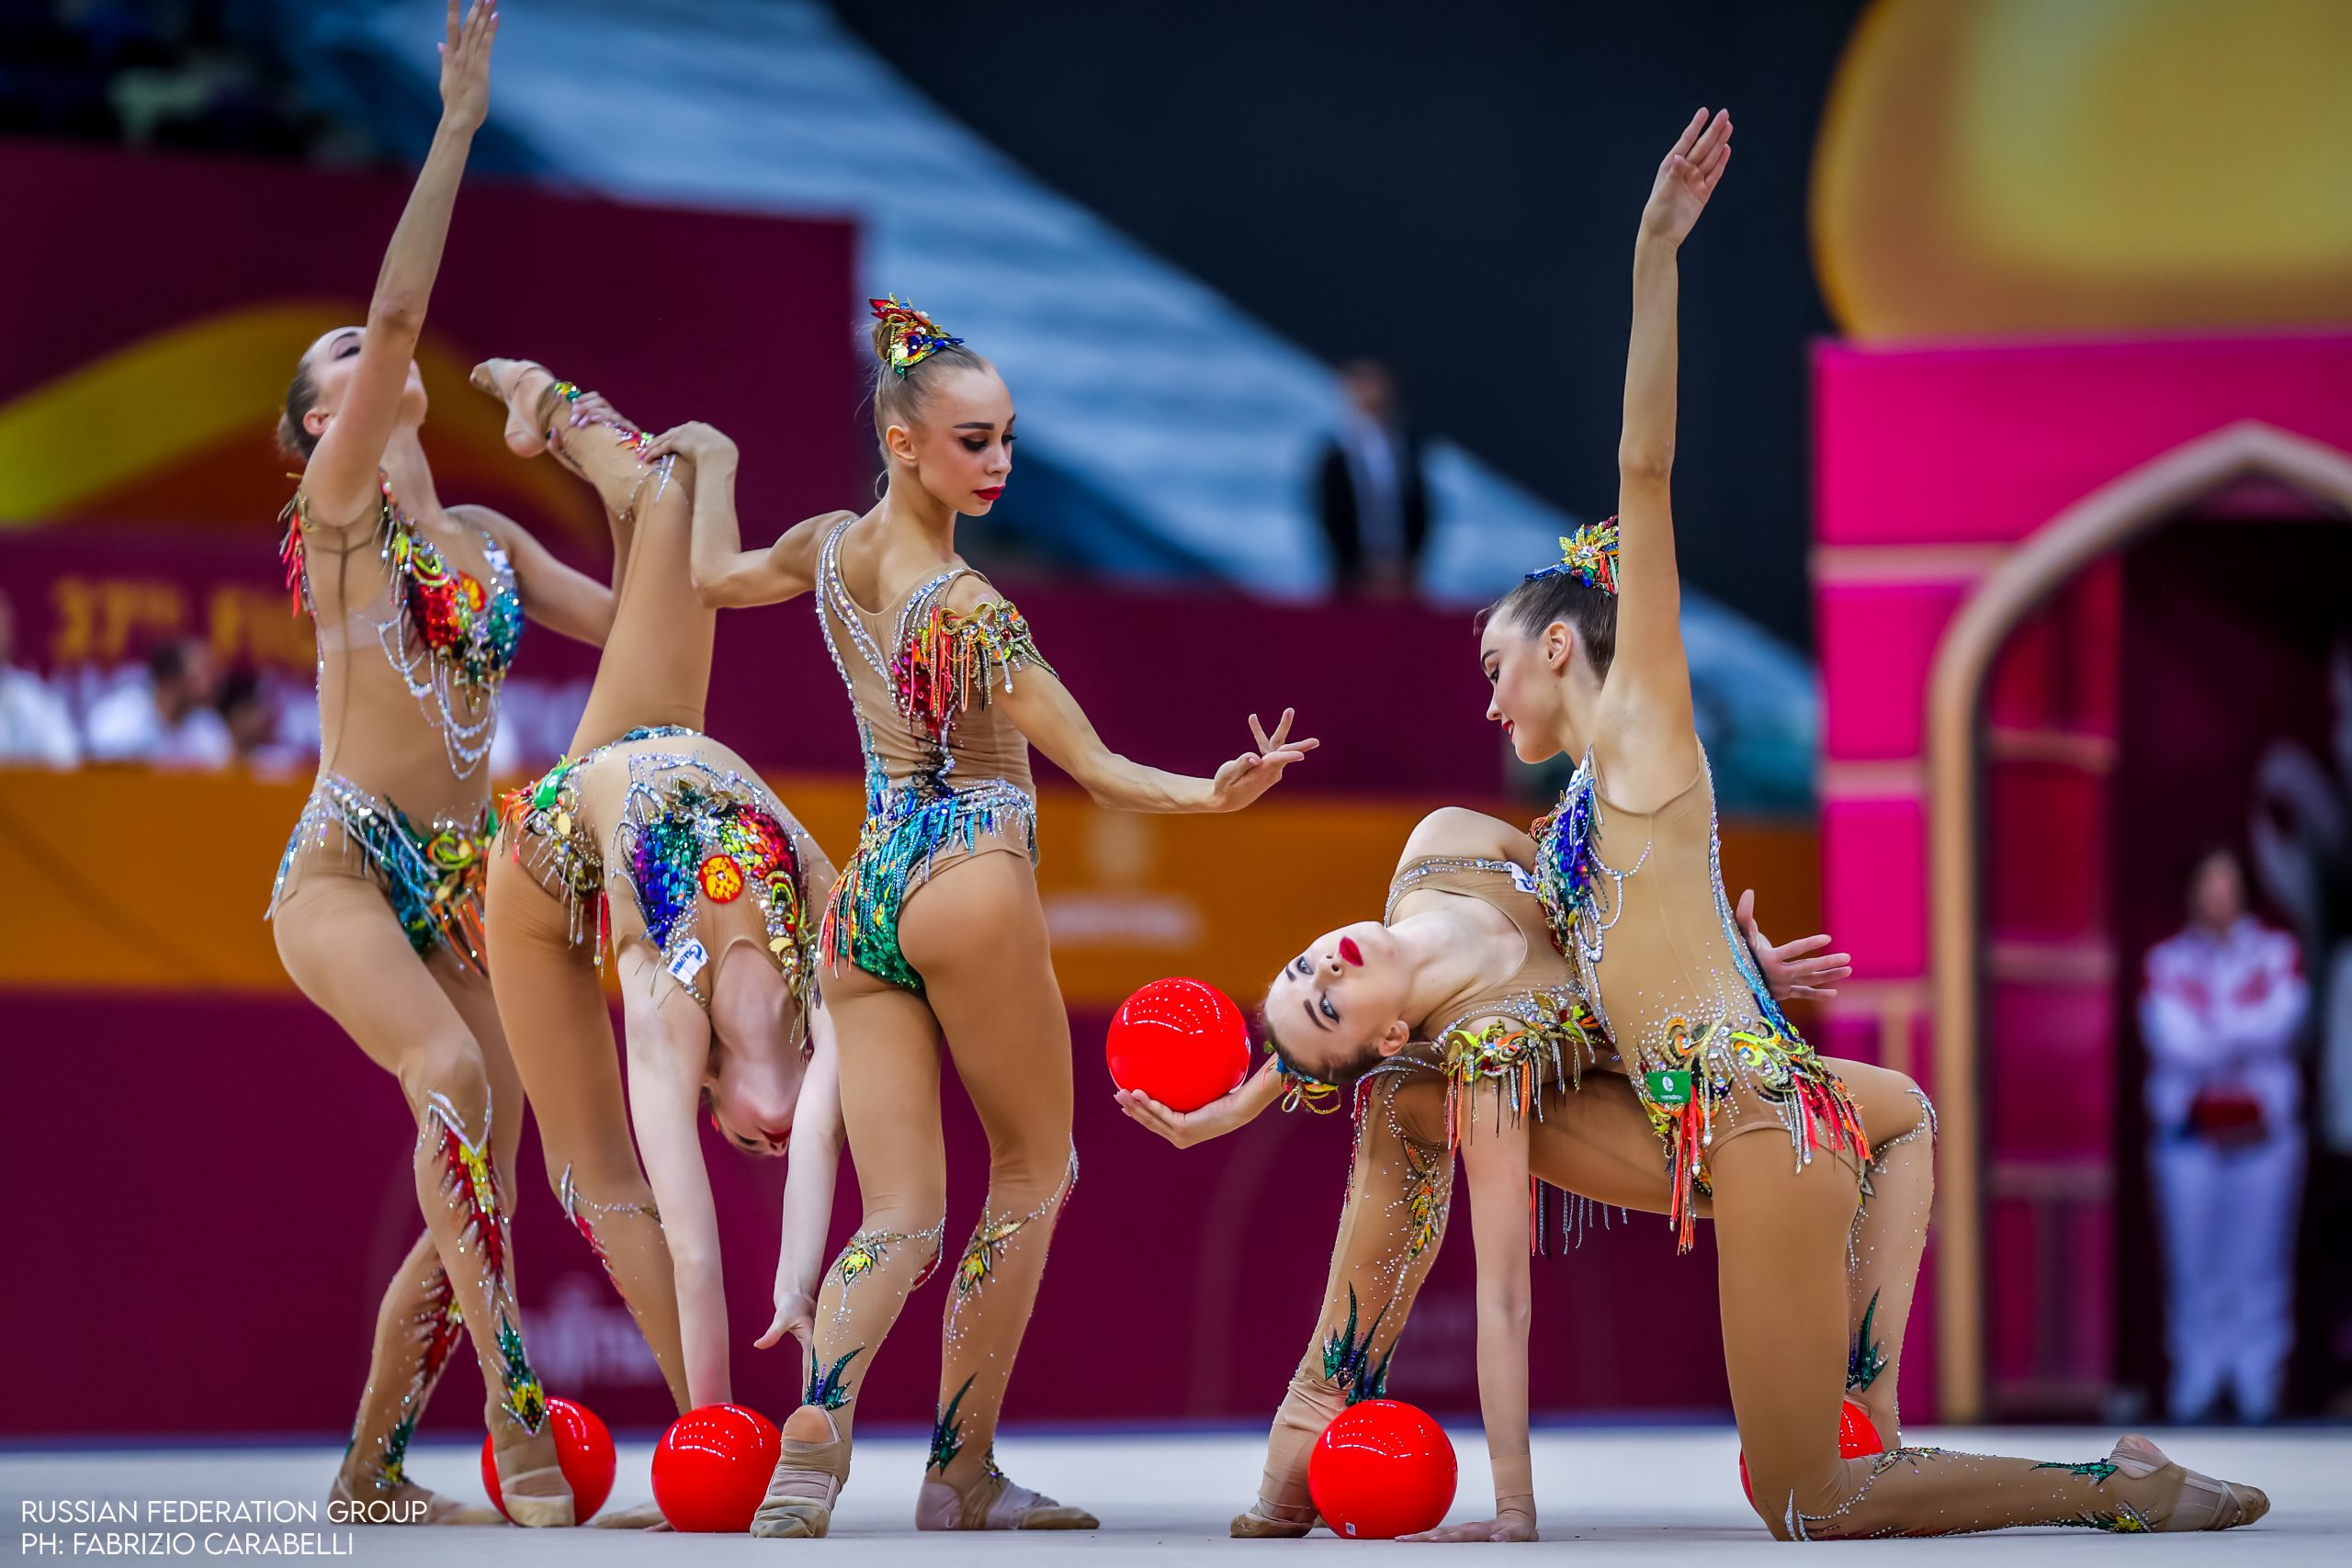 Outfit and apparatus for rhythmic gymnastics in Thailand